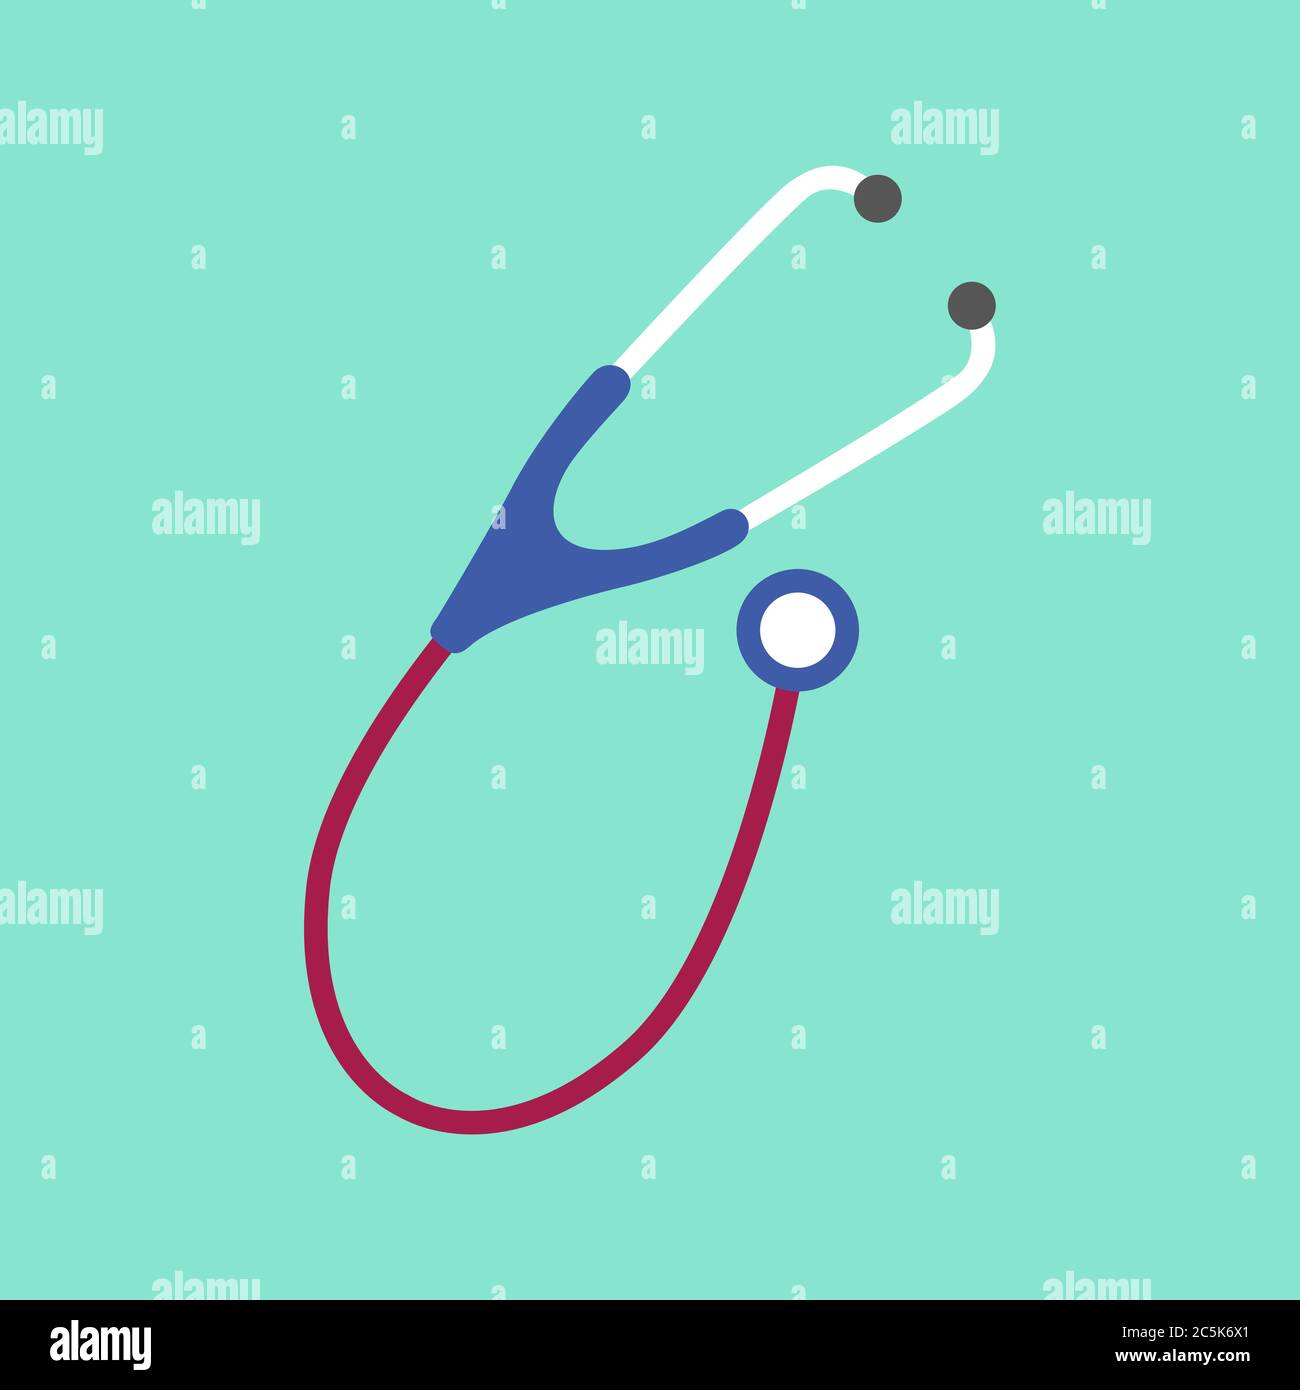 Stethoscope icon isolated vector illustration. Stock Vector